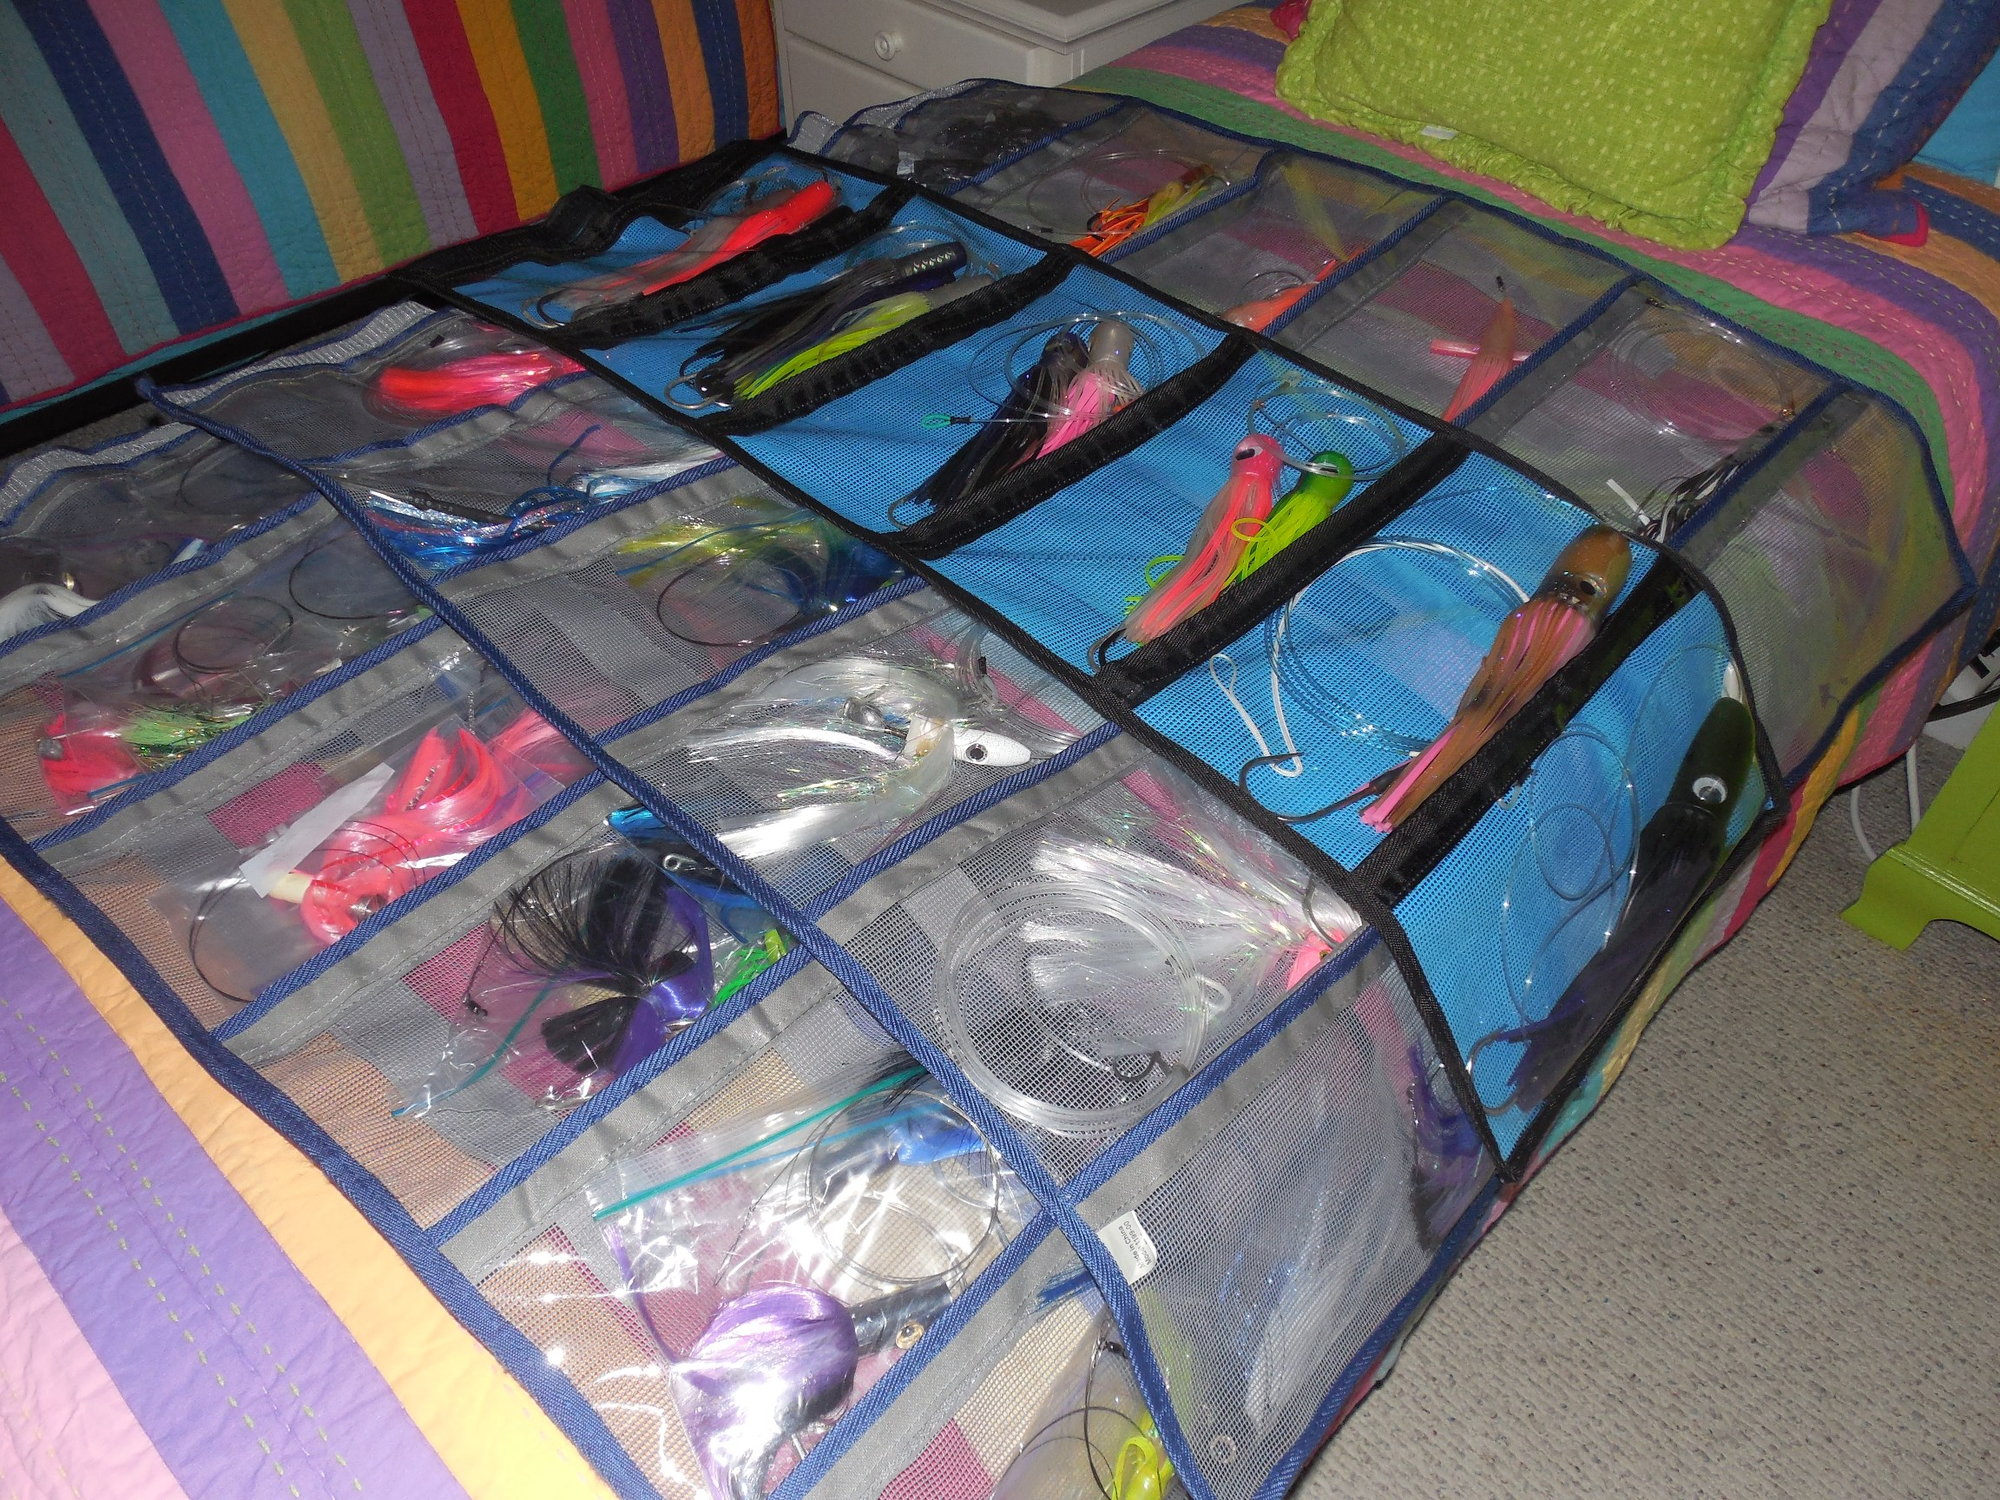 Trolling Lure Storage - Page 2 - The Hull Truth - Boating and Fishing Forum